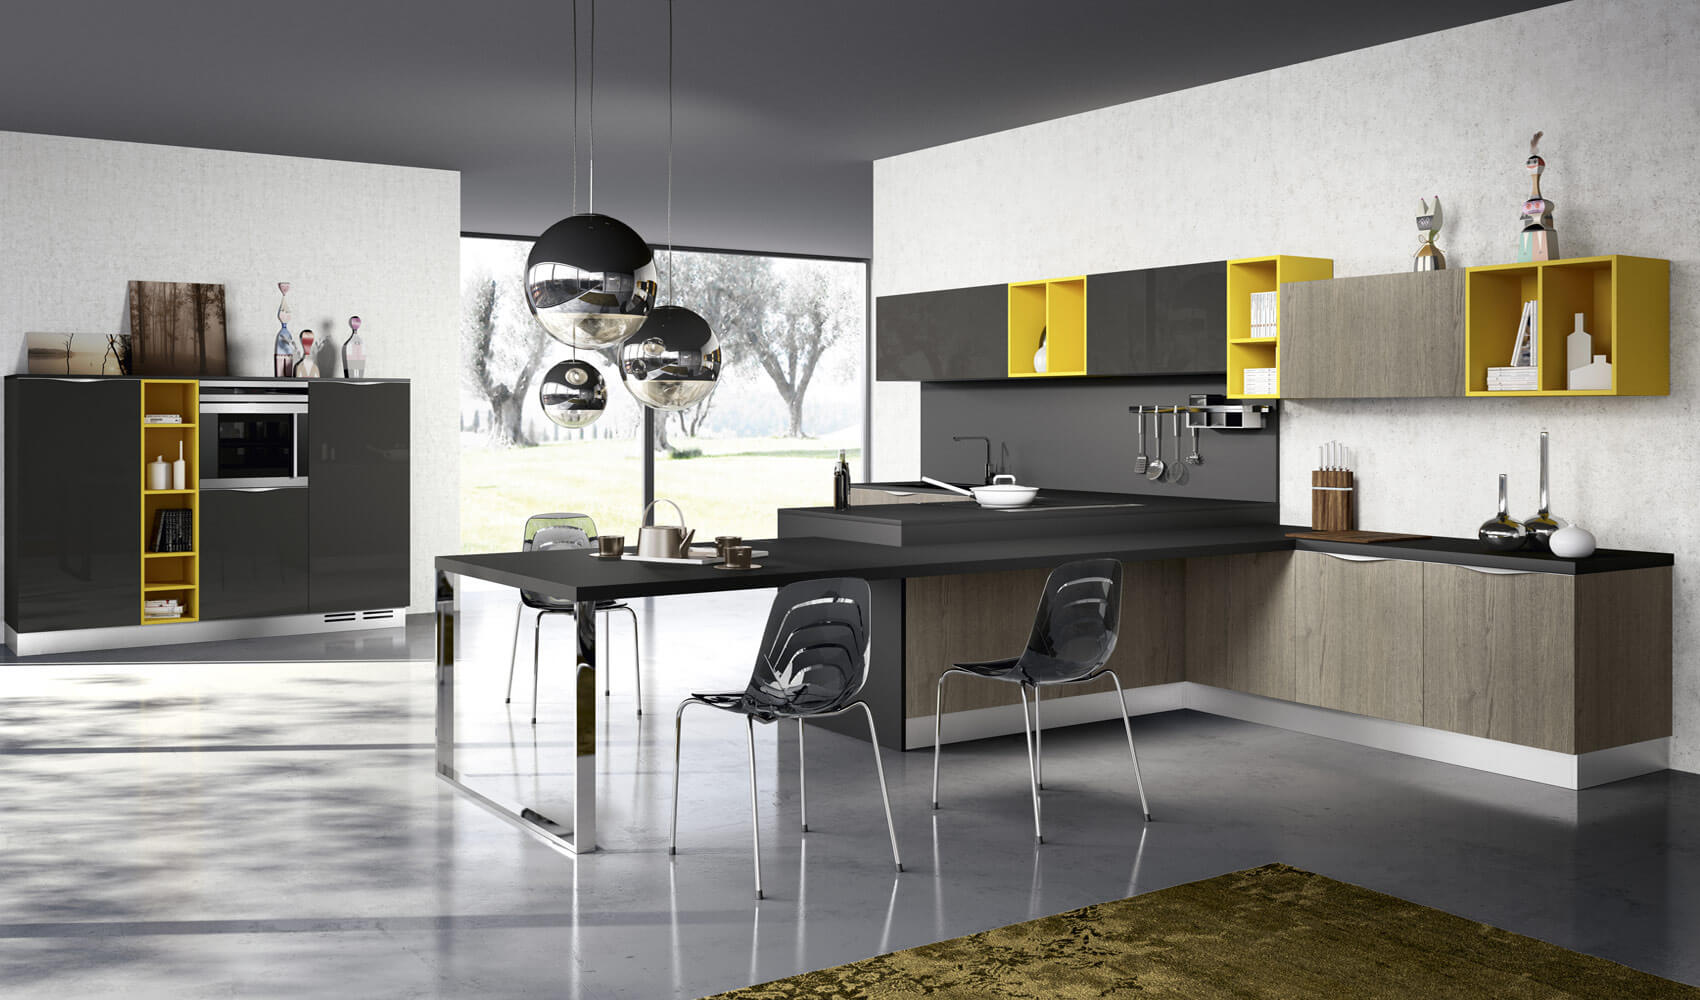 Contemporary kitchen with yellow and gray colors design